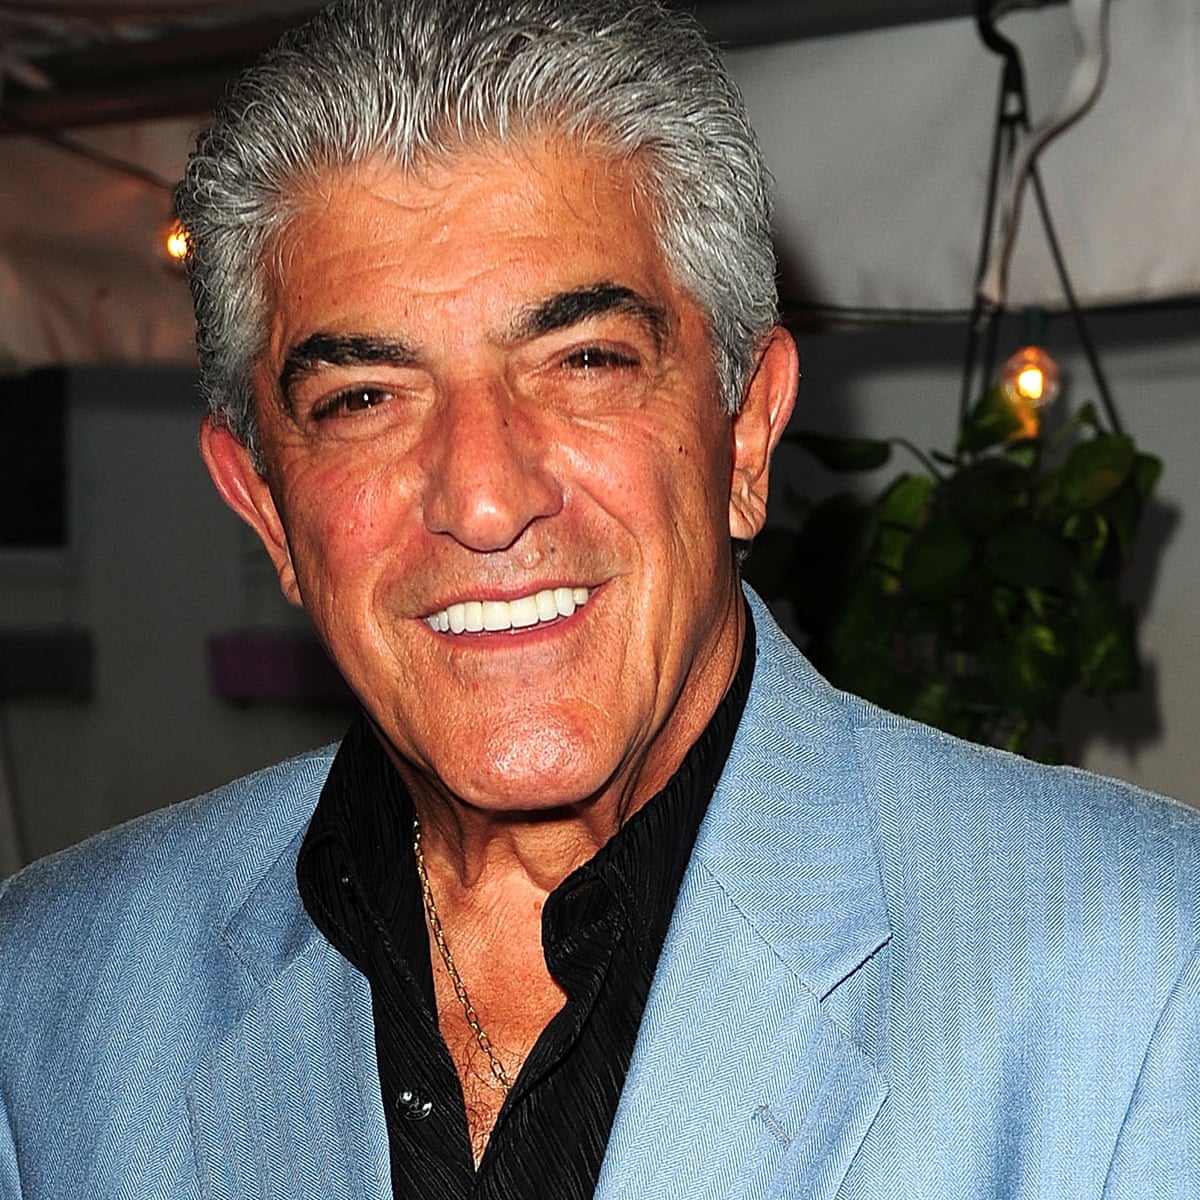 Frank Vincent obituary | Movies | The Guardian